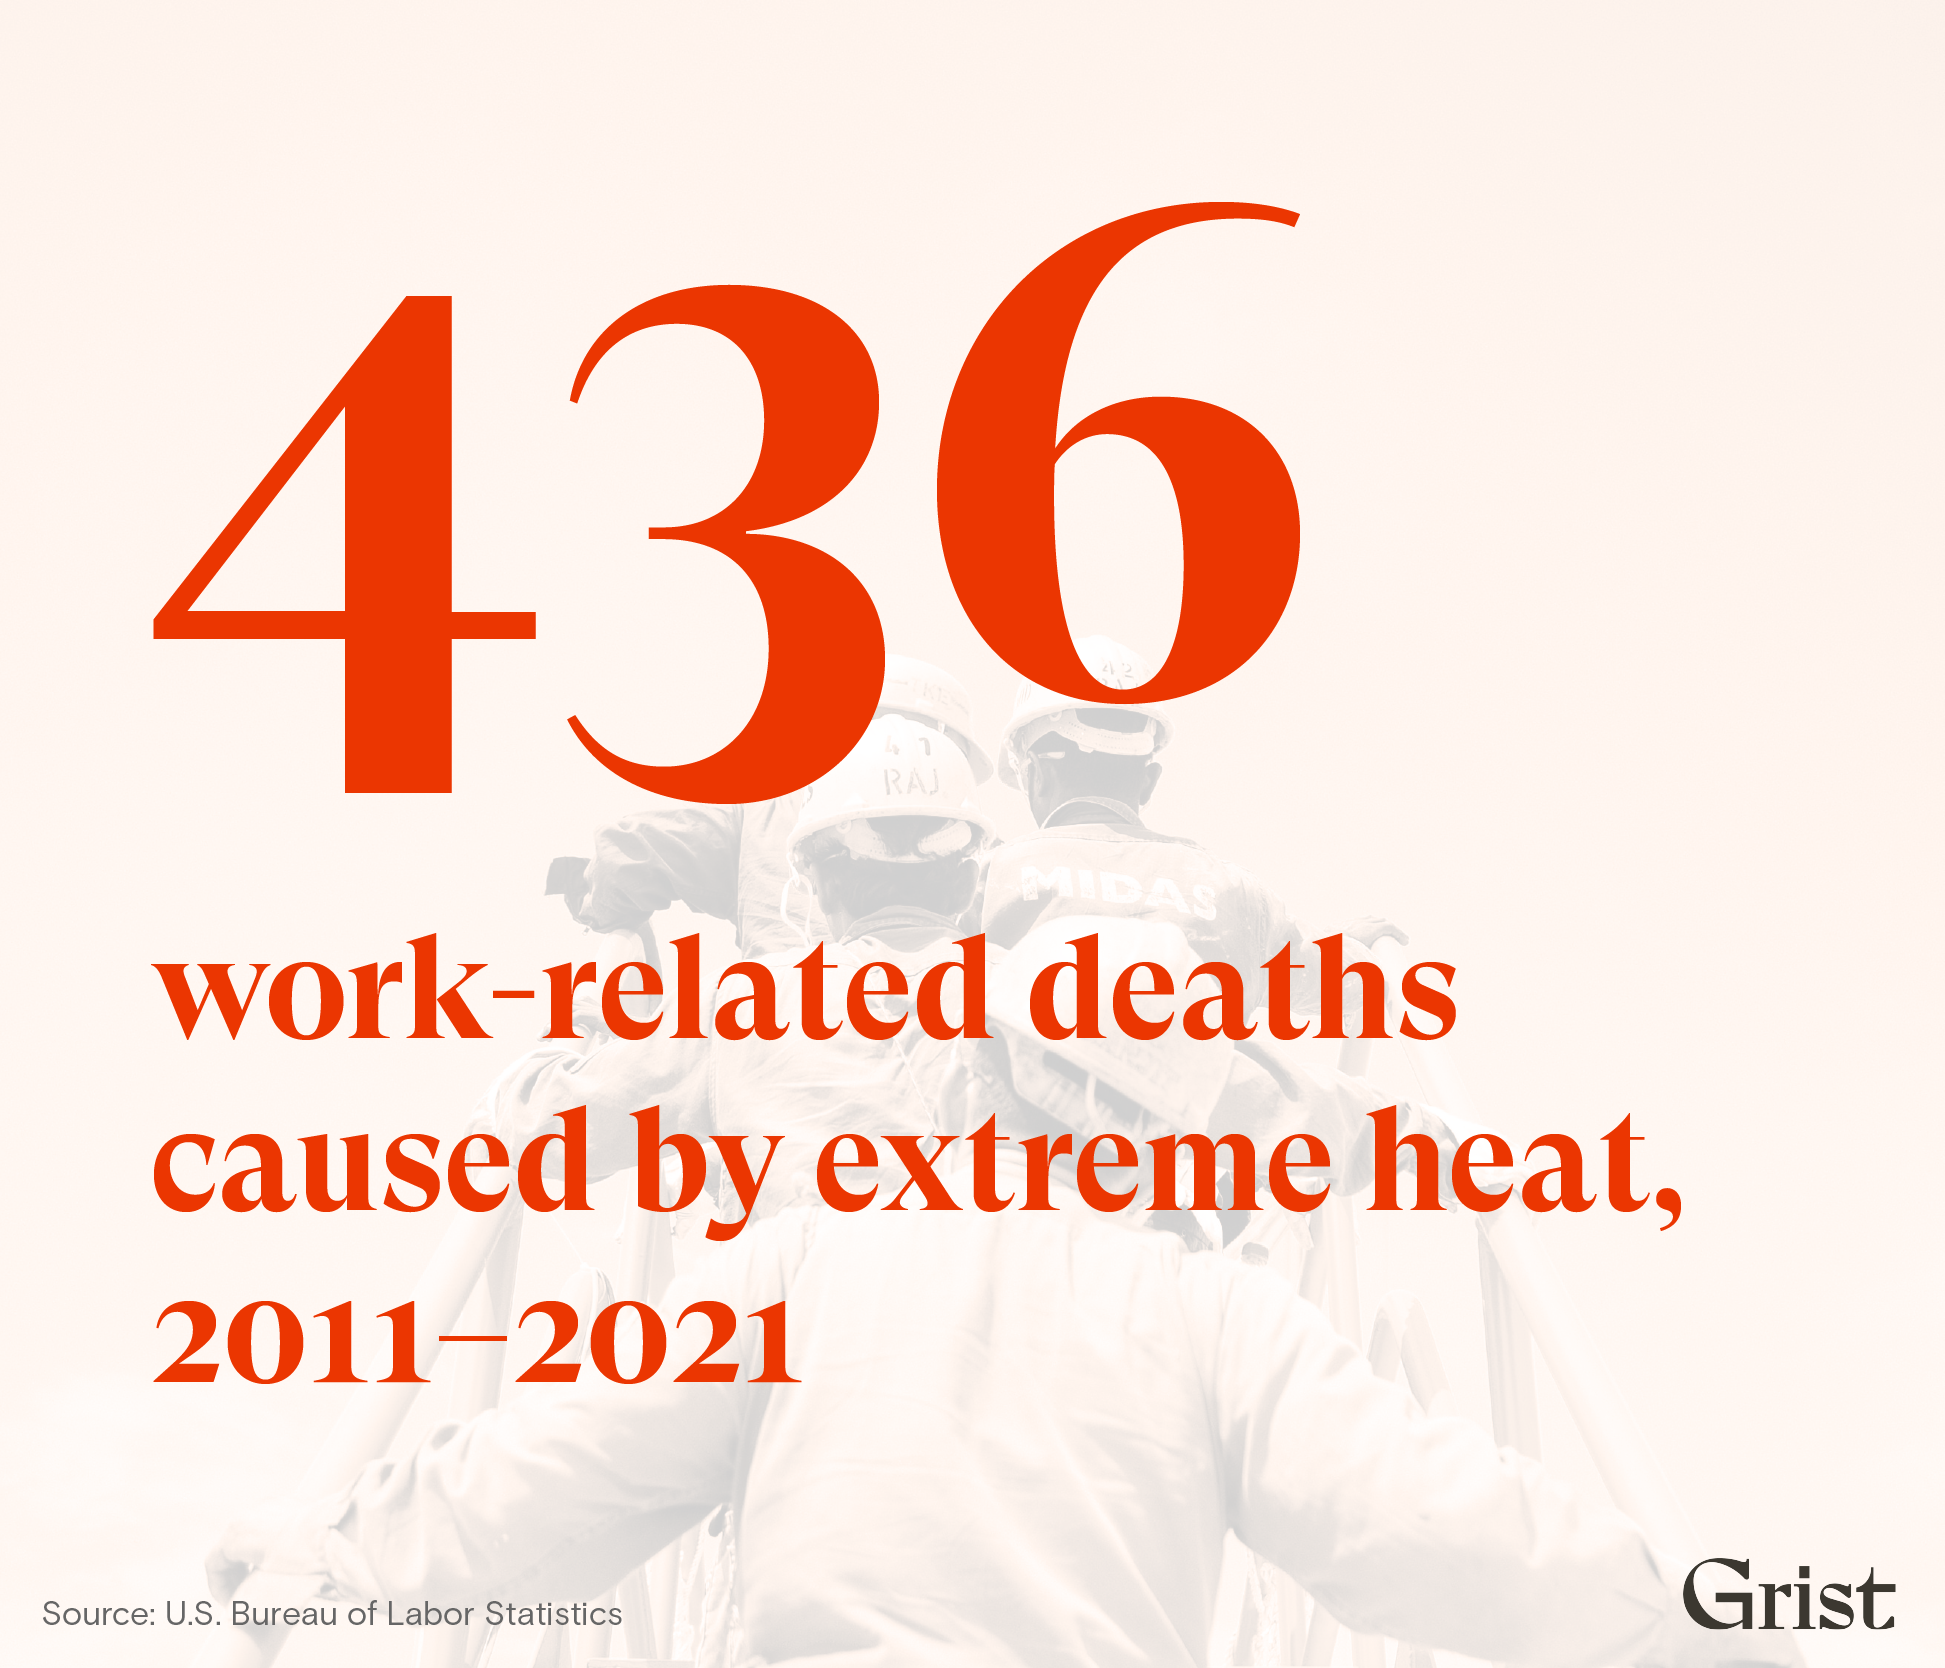 A graphic showing that 436 workers have died from extreme heat from the period of 2011 to 2021, according to data from the Bureau of Labor Statistics